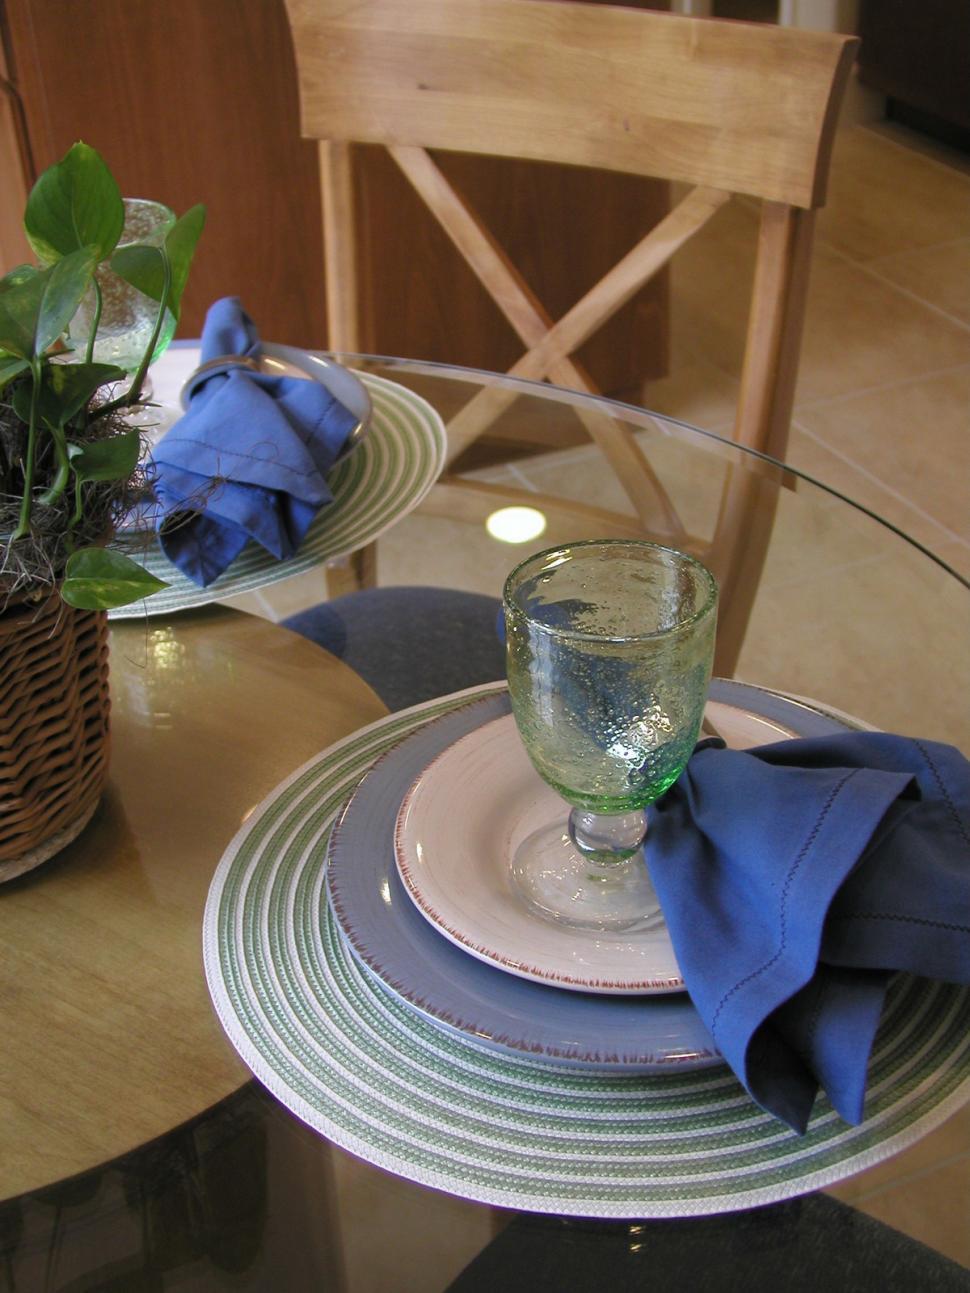 Free Image of Fancy Place Settings 